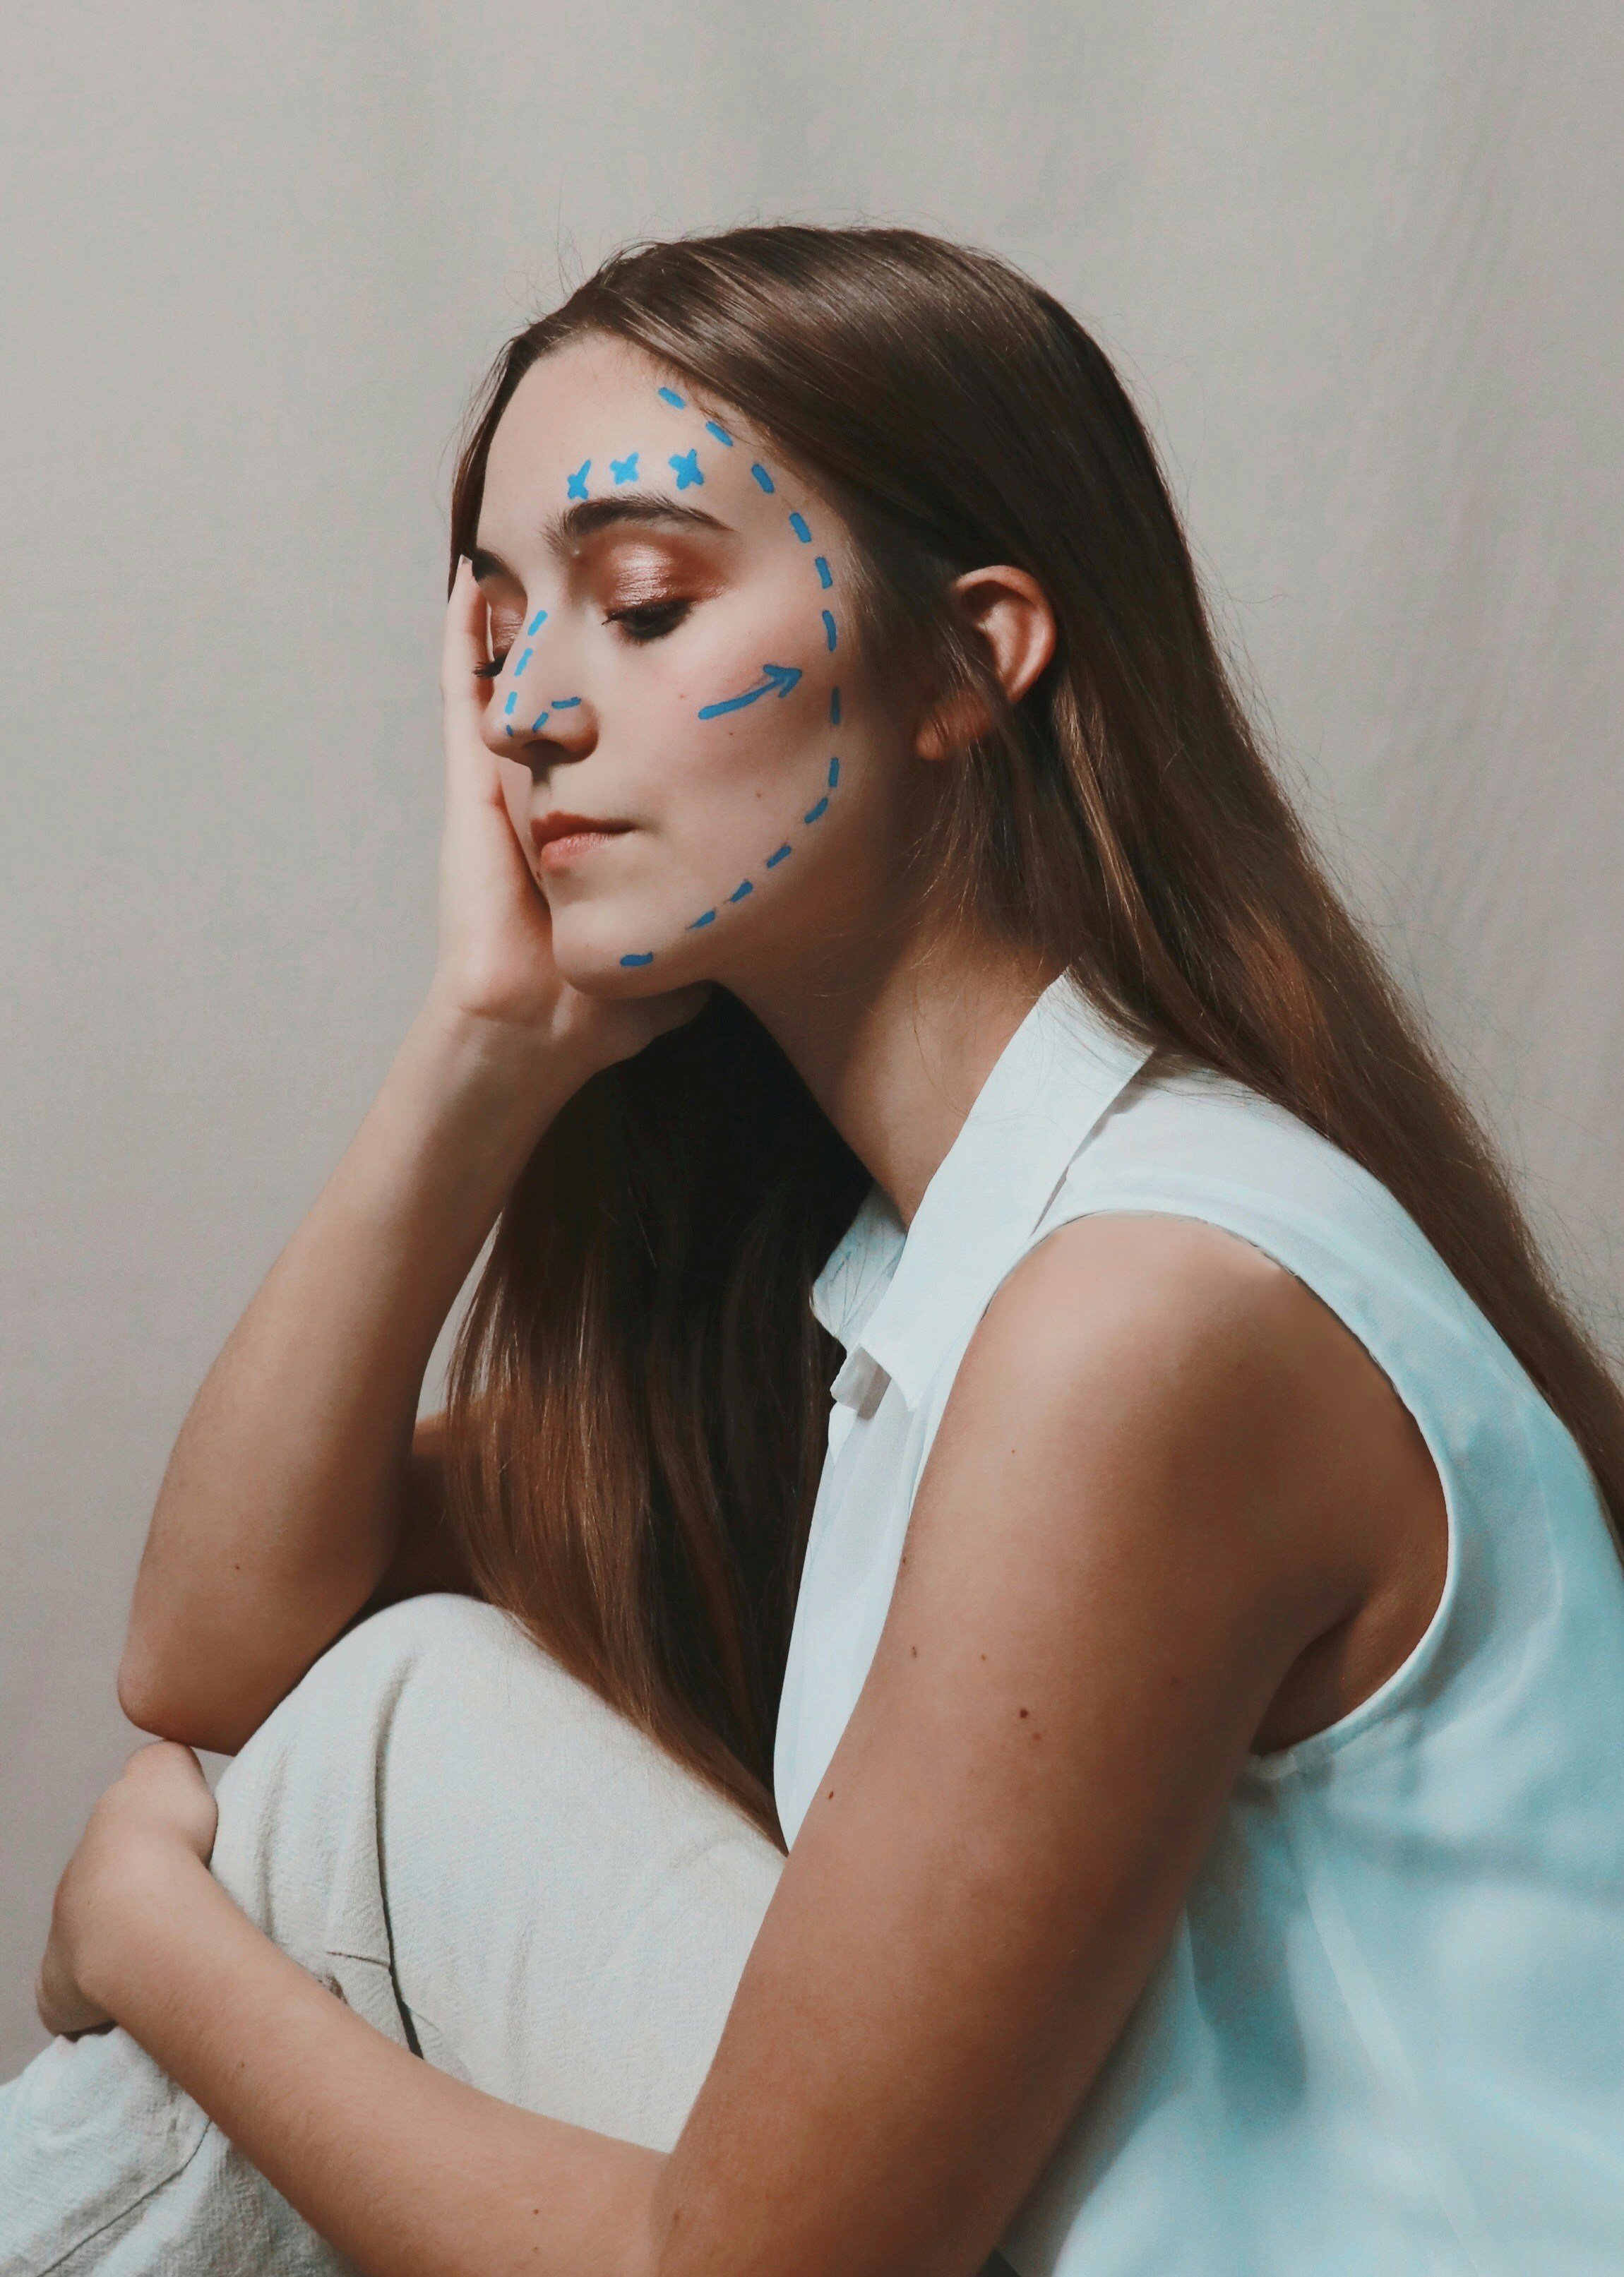 A girl with blue markings on face